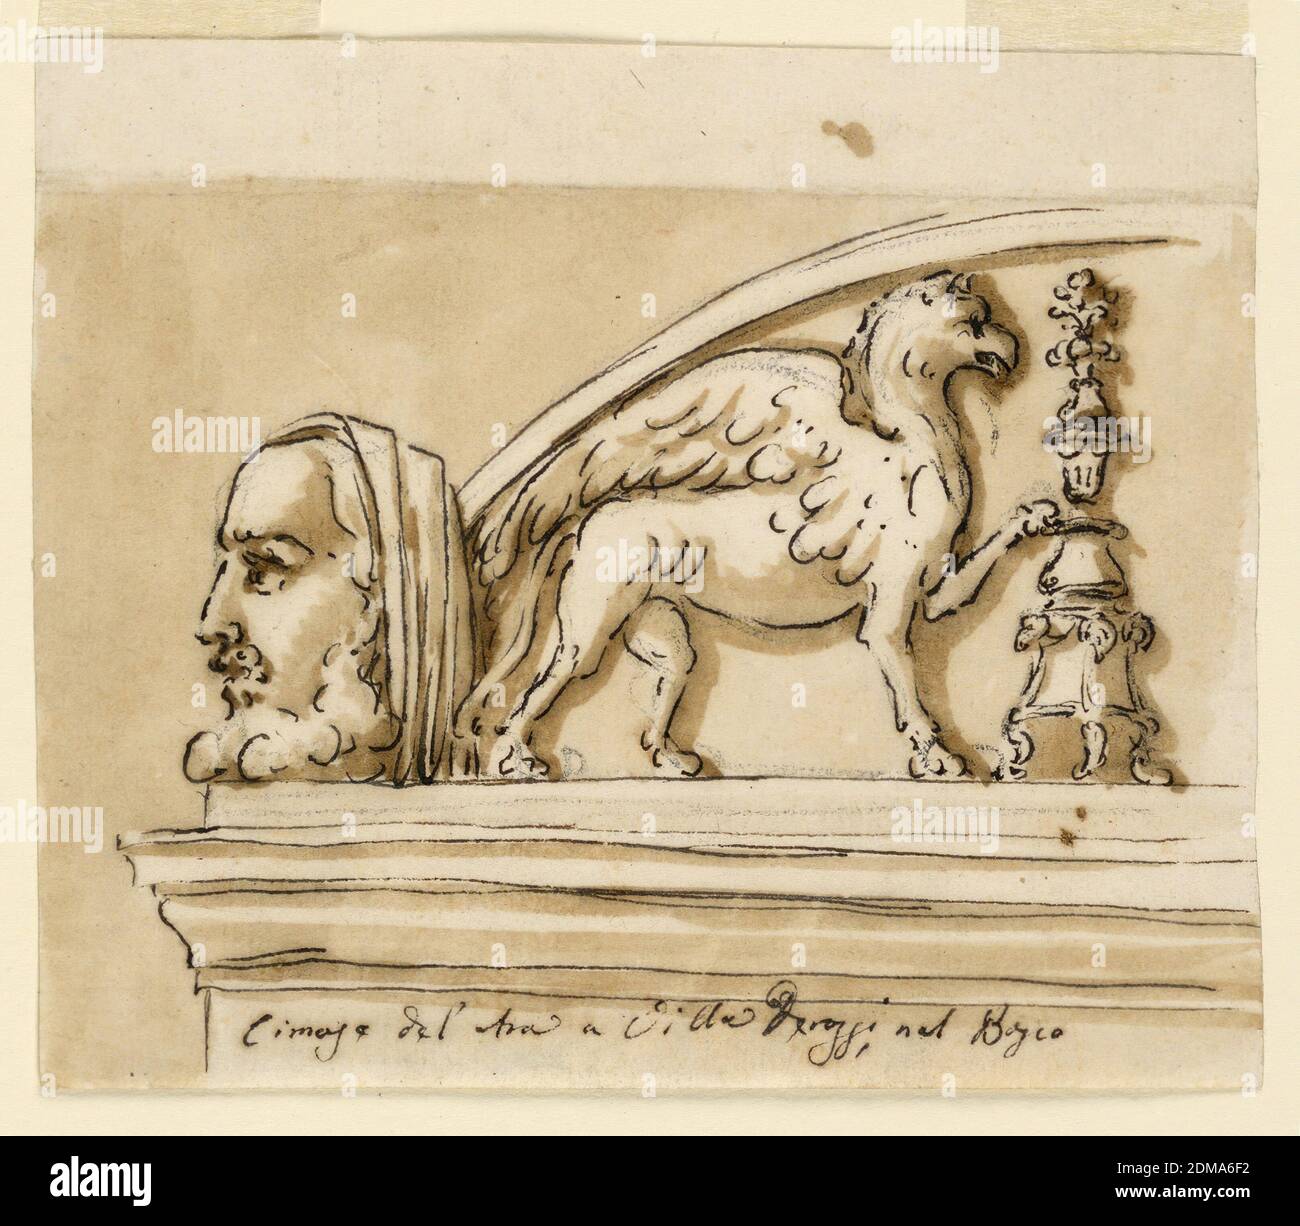 Cresting of an altar, Giuseppe Barberi, Italian, 1746–1809, Pen and brown ink, brush and brown wash, graphite on off-white laid paper, lined, The left side: above an entablature rises a panel framed by a segment. In it, beside a candelabrum, stands a griffin. In front of its left lower corner stands a bearded head as an acroterium. Caption below: 'Cimaze del'Ara a Villa Derossi nel Bosco'. At left, the background is colored., Rome, Italy, 1780–1790, architecture, Drawing Stock Photo